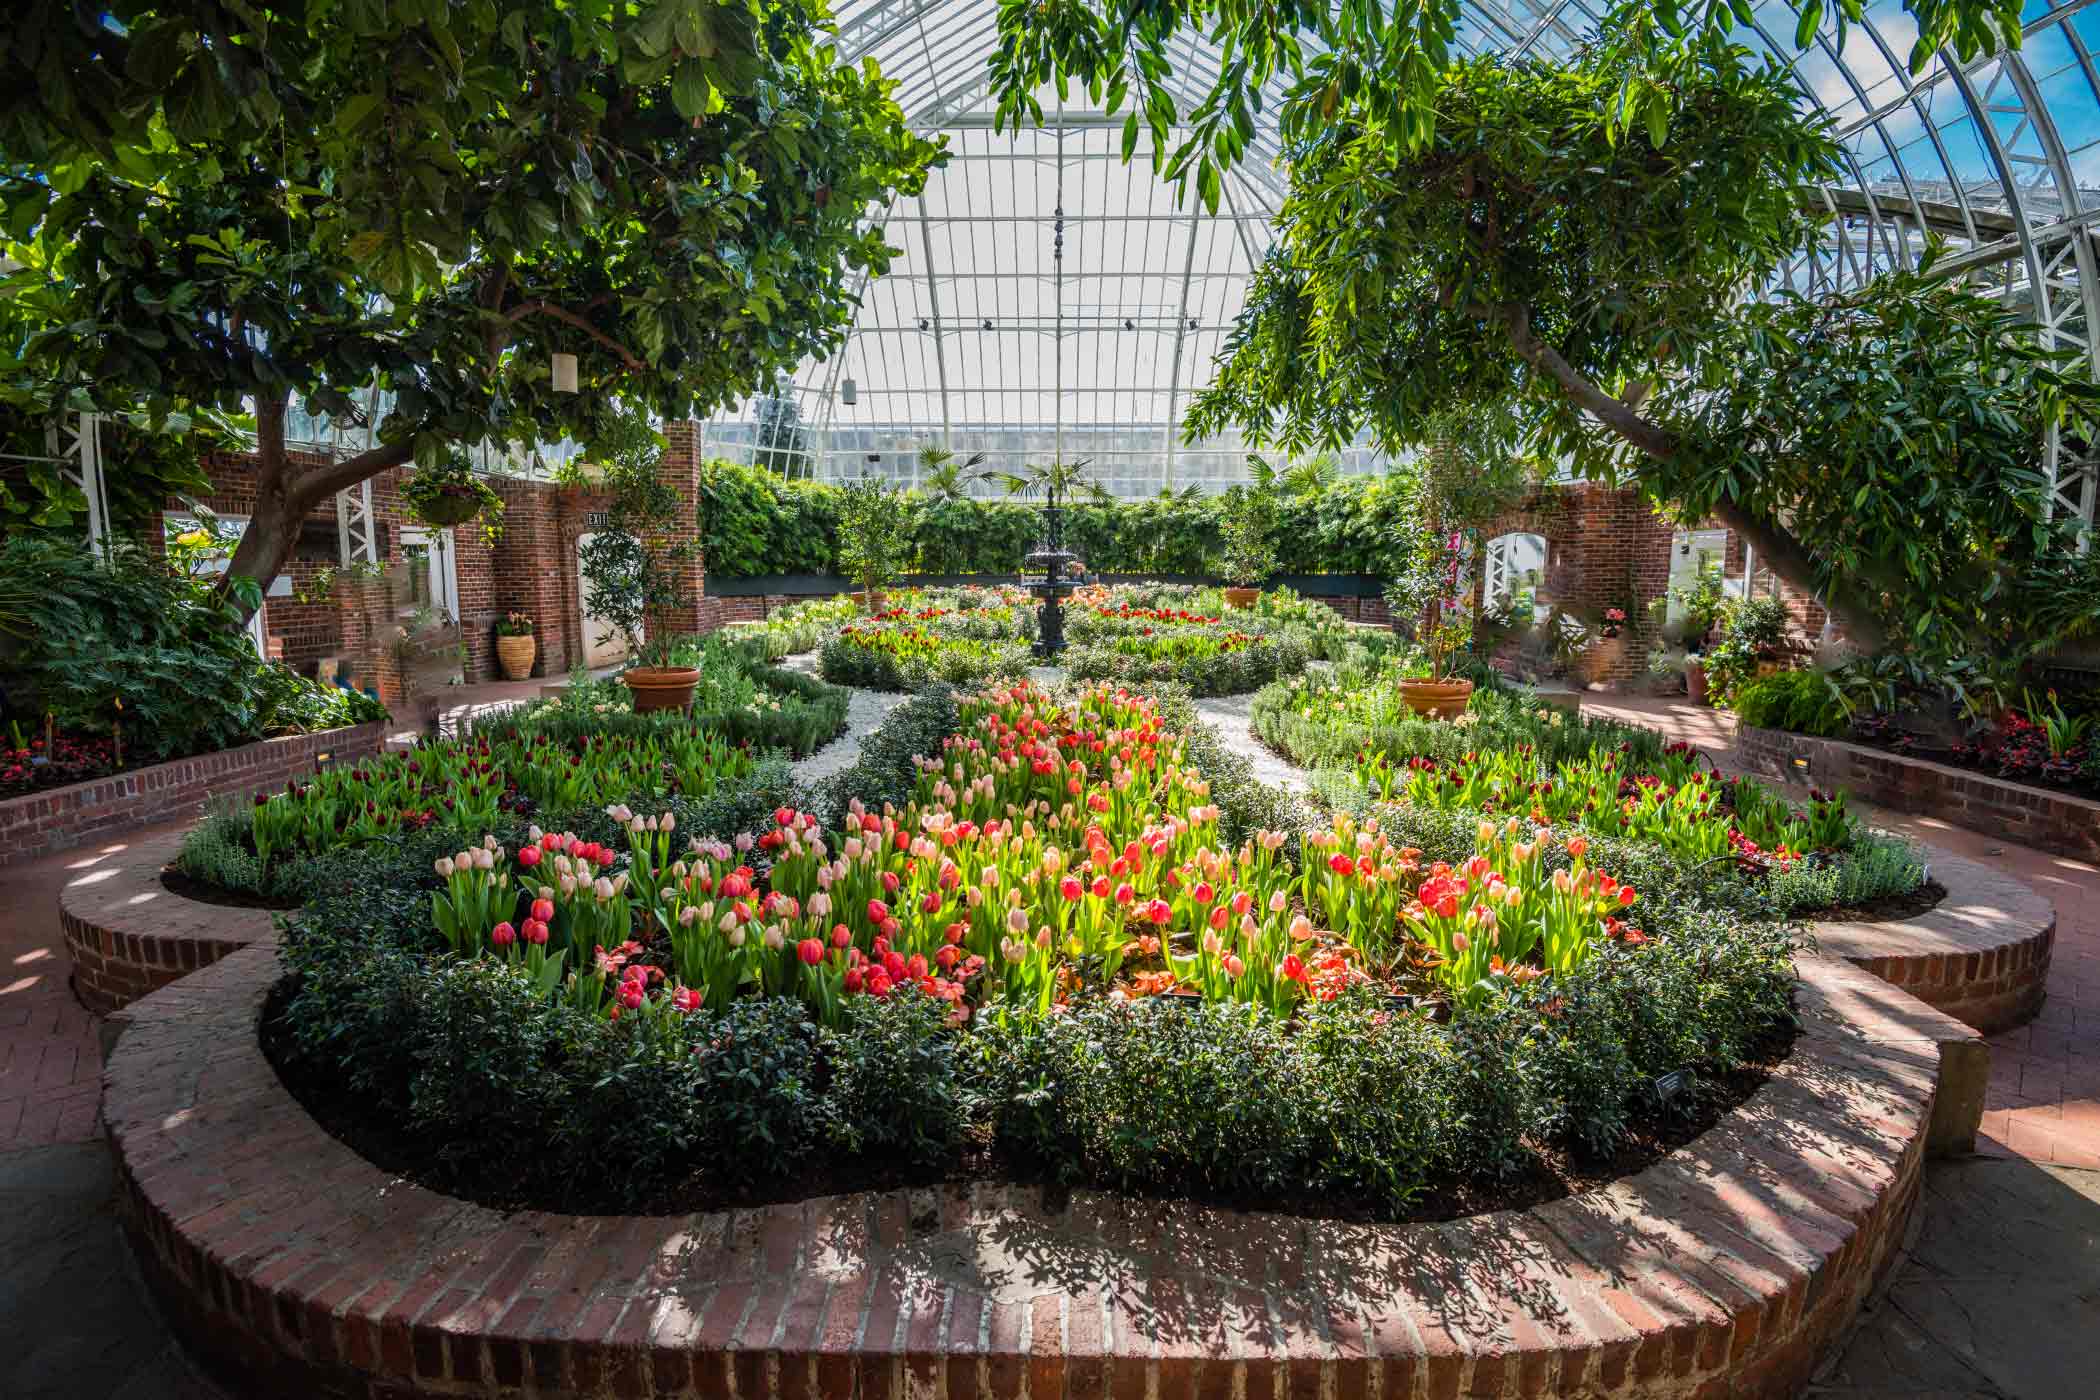 Spring Flower Show Scents of Wonder Phipps Conservatory and